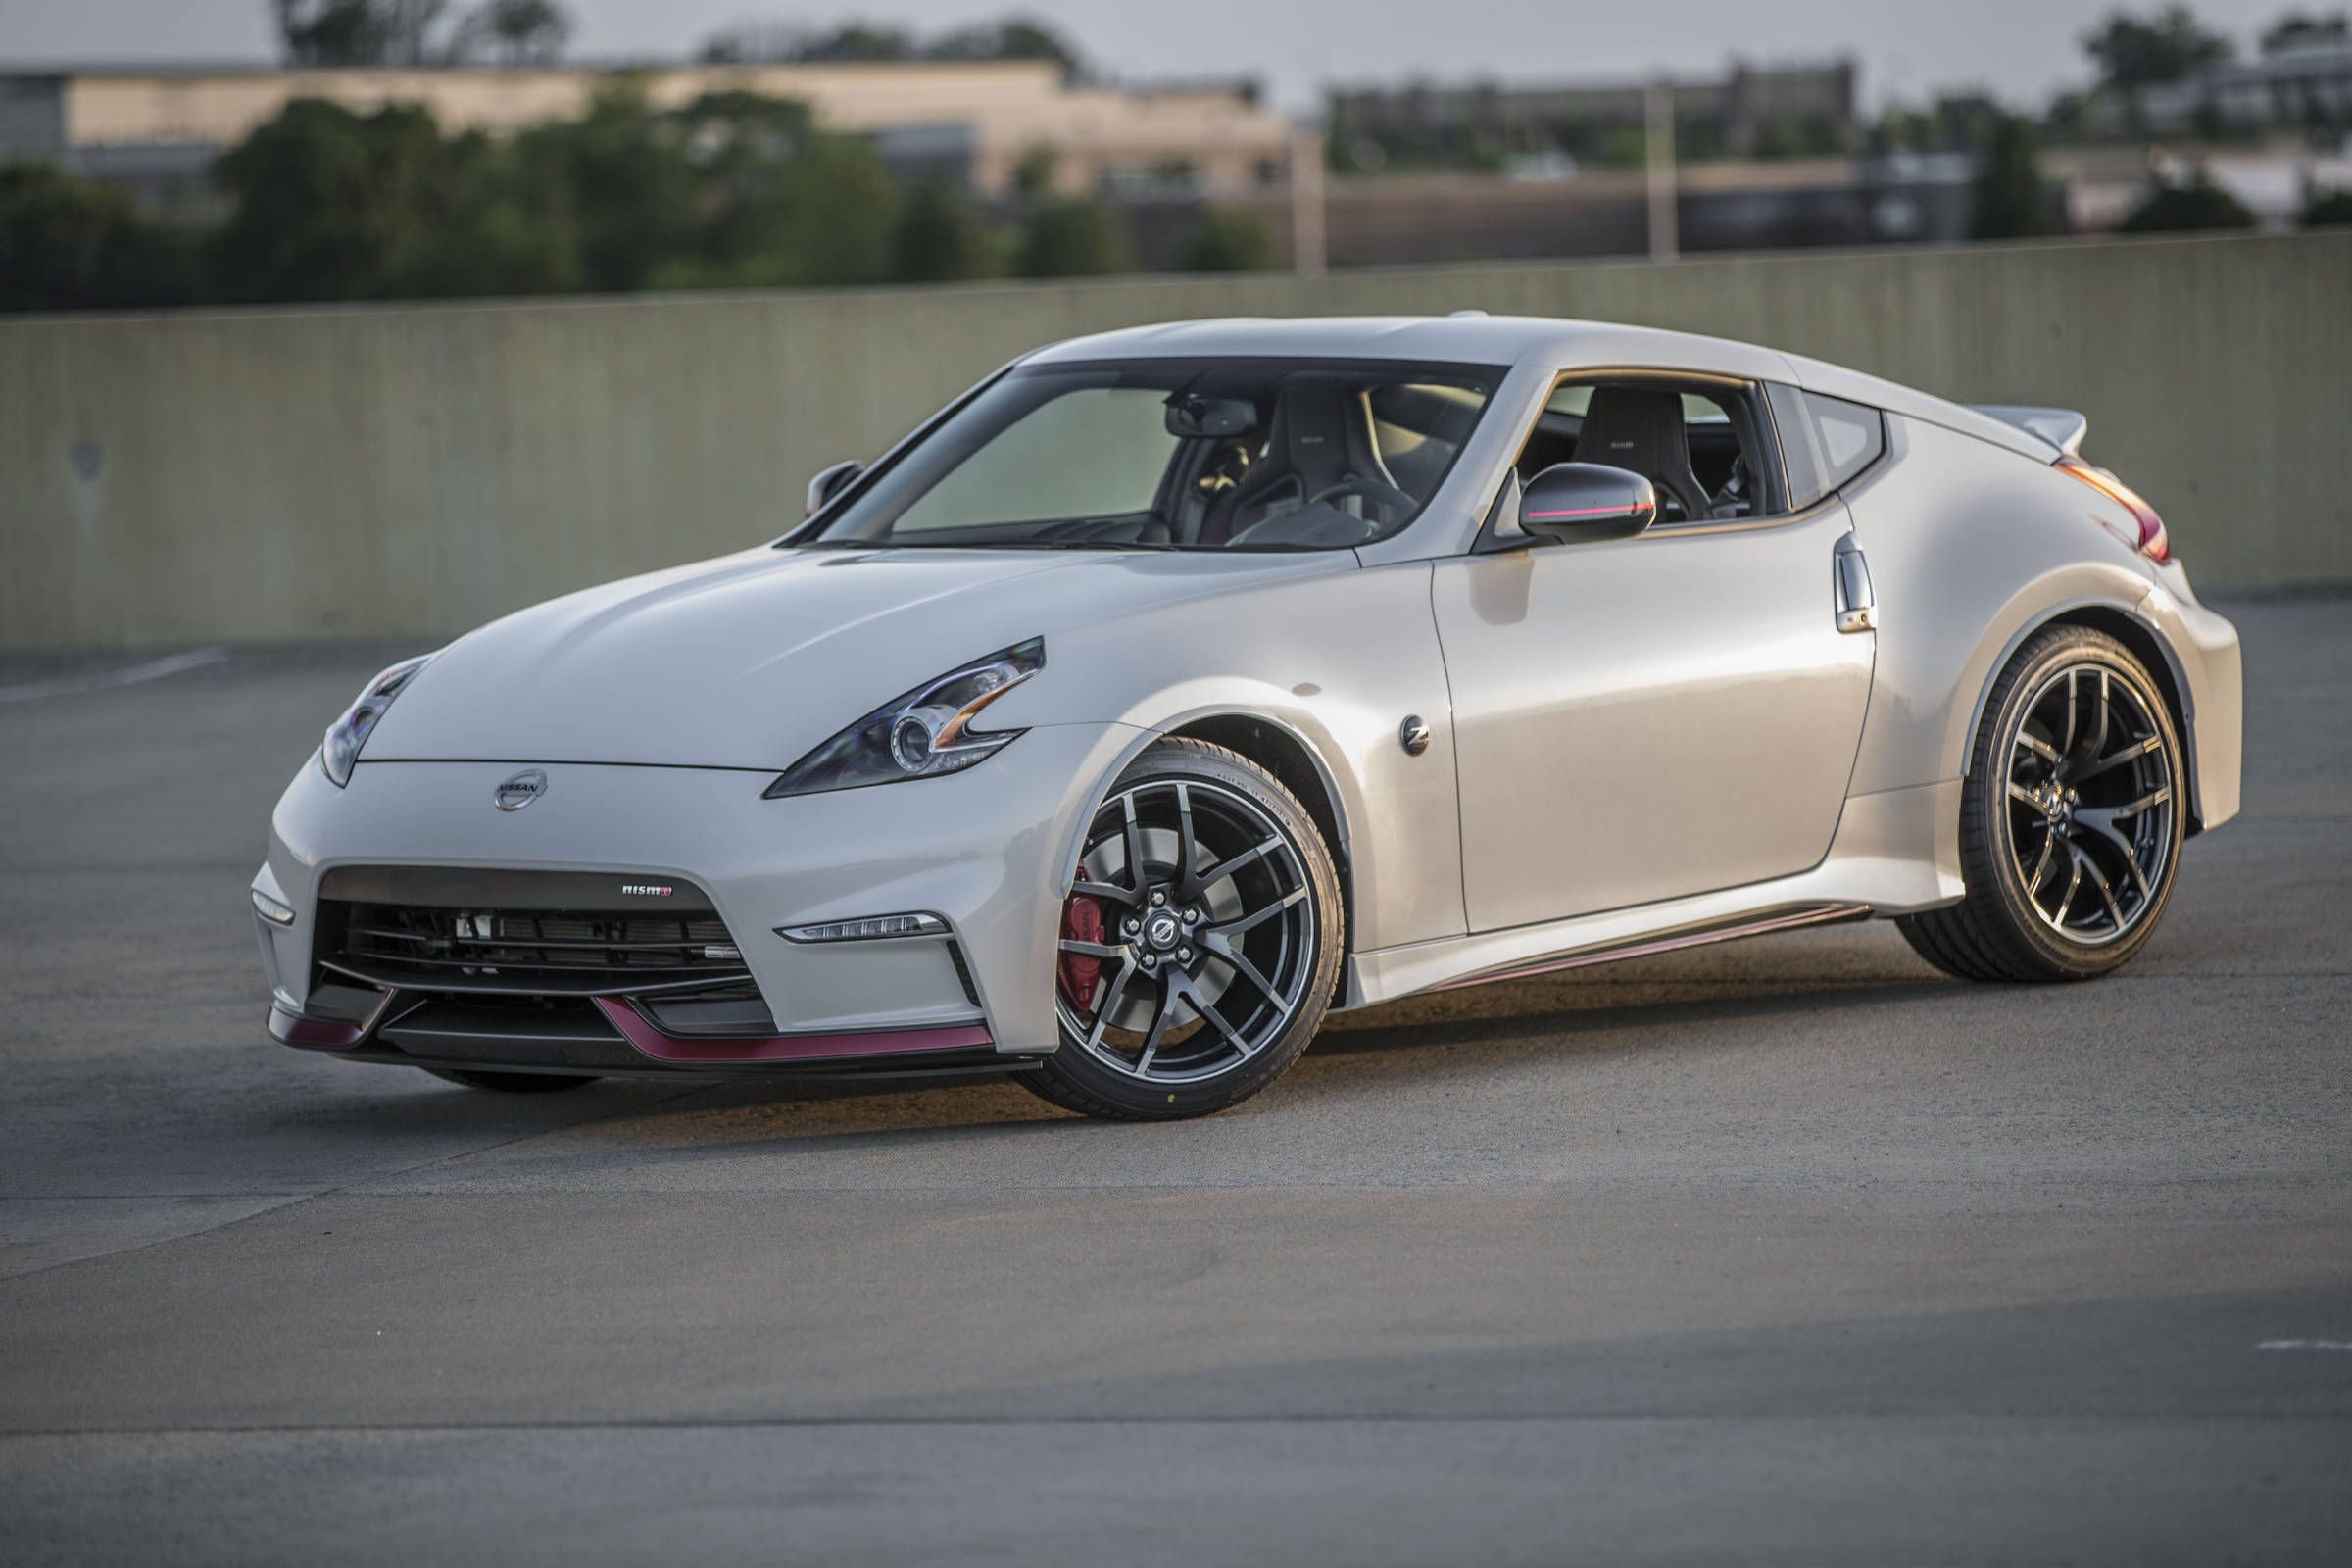 2018 Nissan 370Z Nismo essentials: I should love this